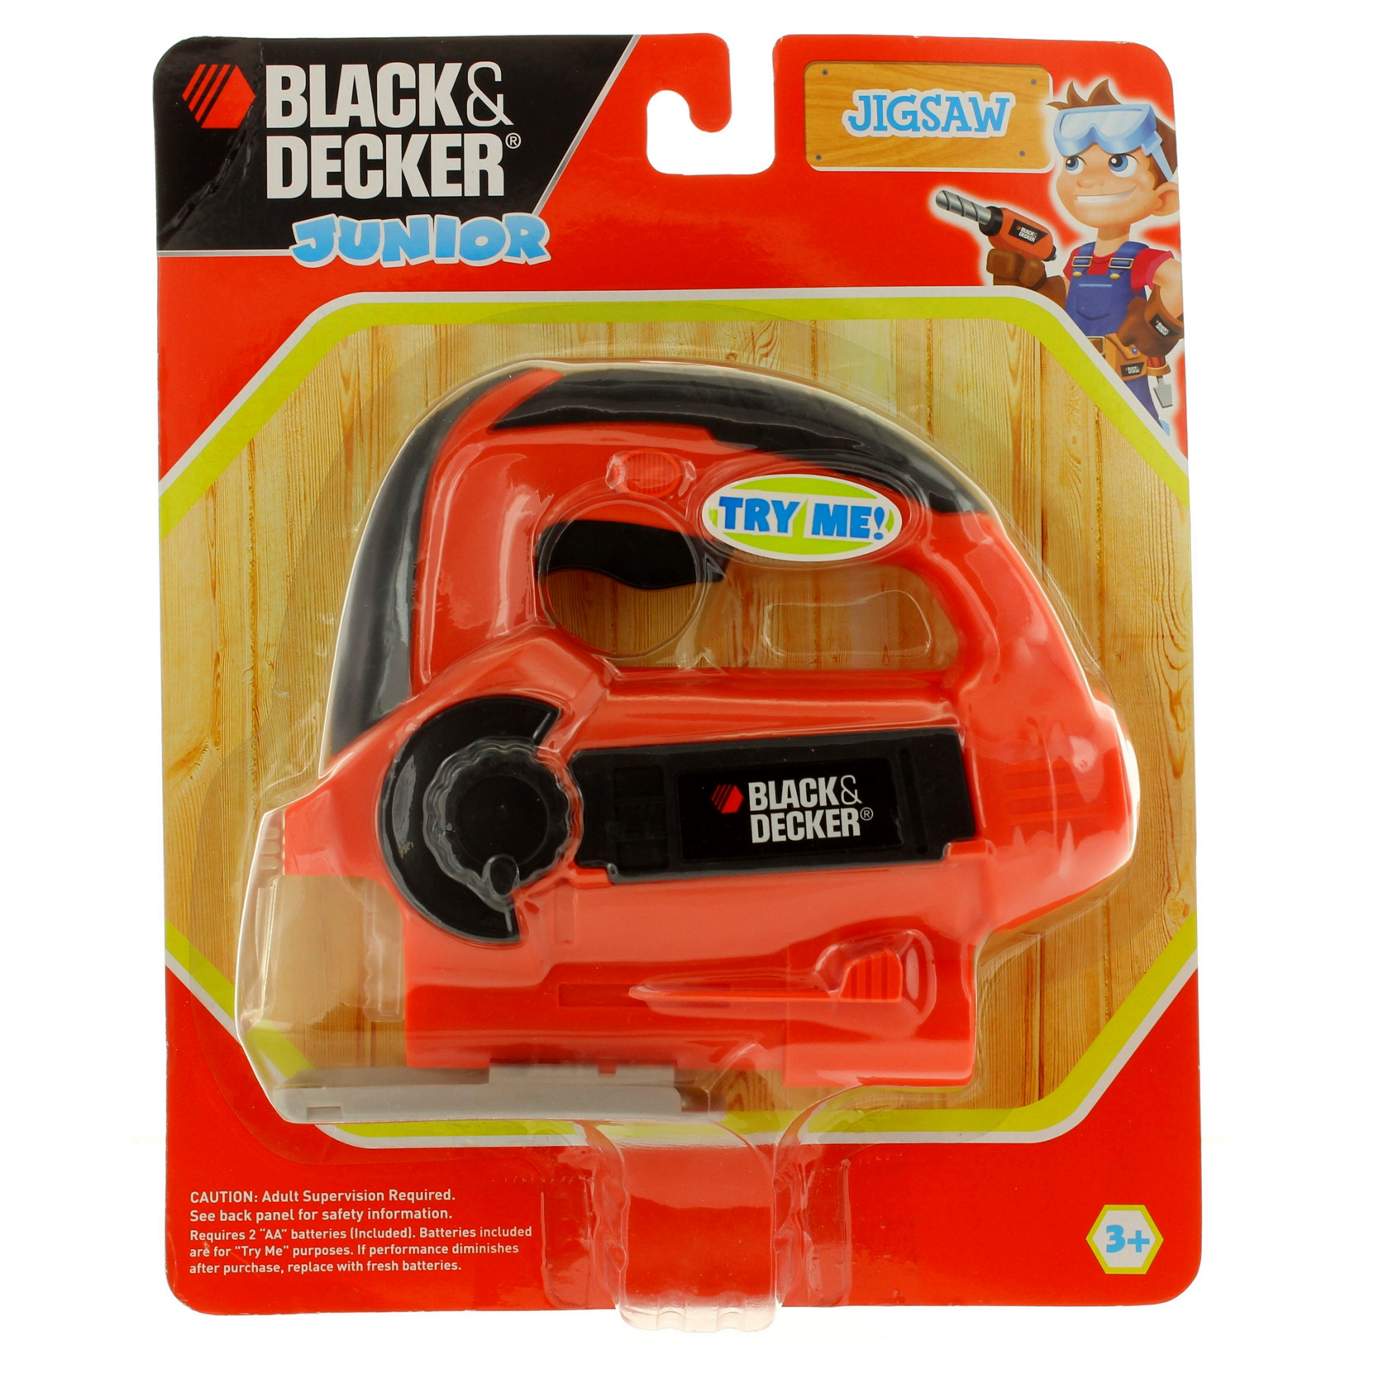 Black & Decker Junior Electronic Power Play Tools, Styles May Vary